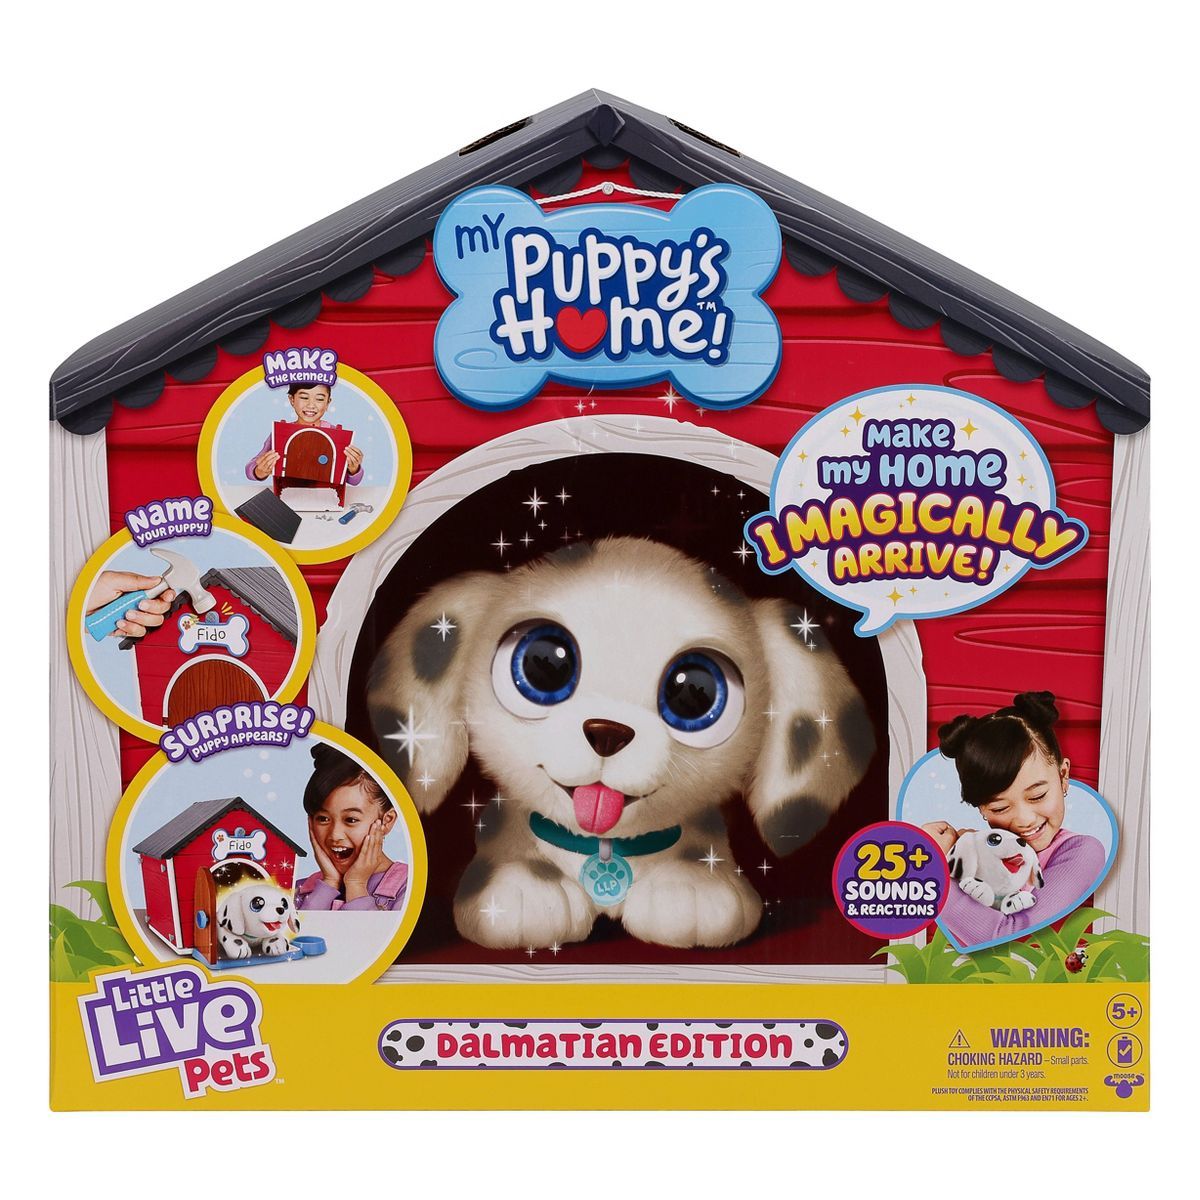 Little Live Pets My Puppy's Home Dalmatian Edition (Target Exclusive) | Target